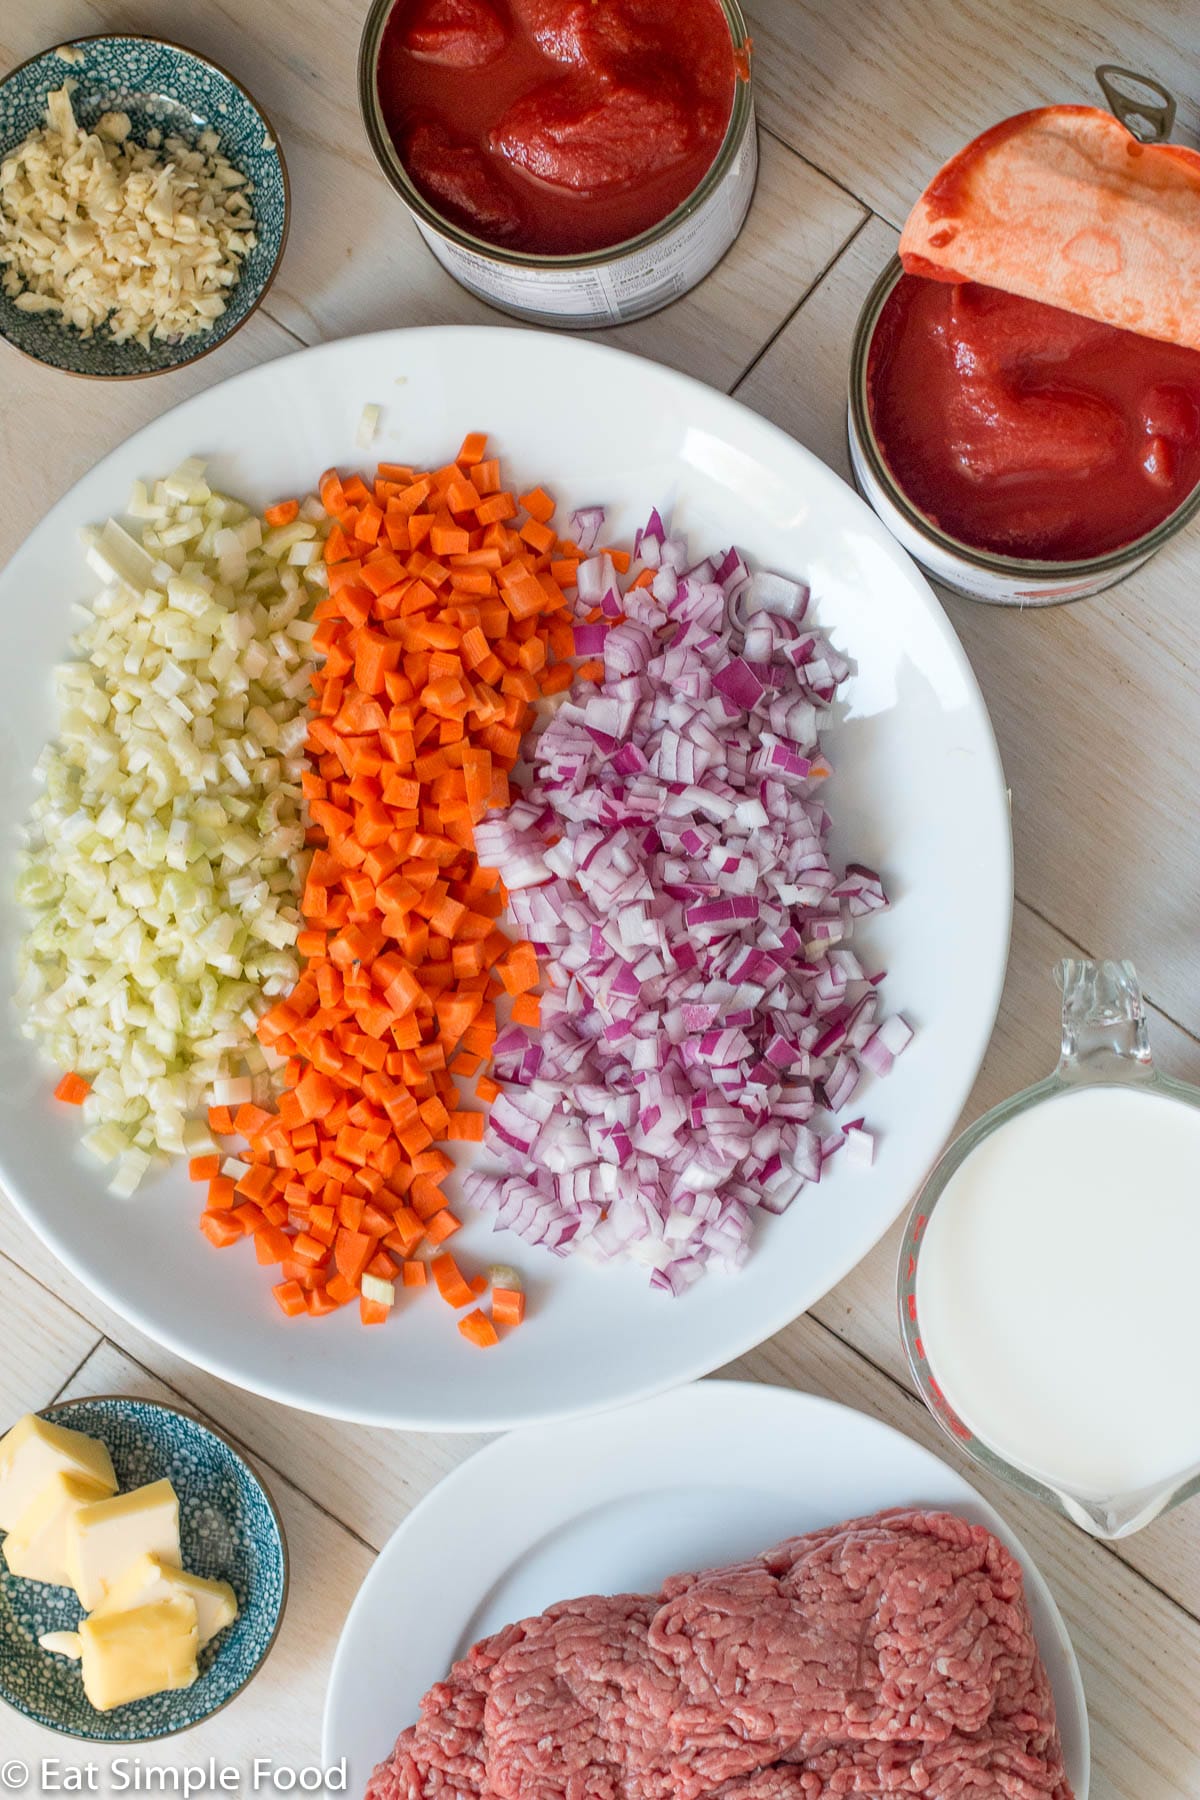 Raw ingredients on white plates and colorful bowls: chopped red onions, chopped carrots, chopped celery, raw ground beef, butter tabs, minced garlic, 2 cans of tomatoes, and glass of milk.